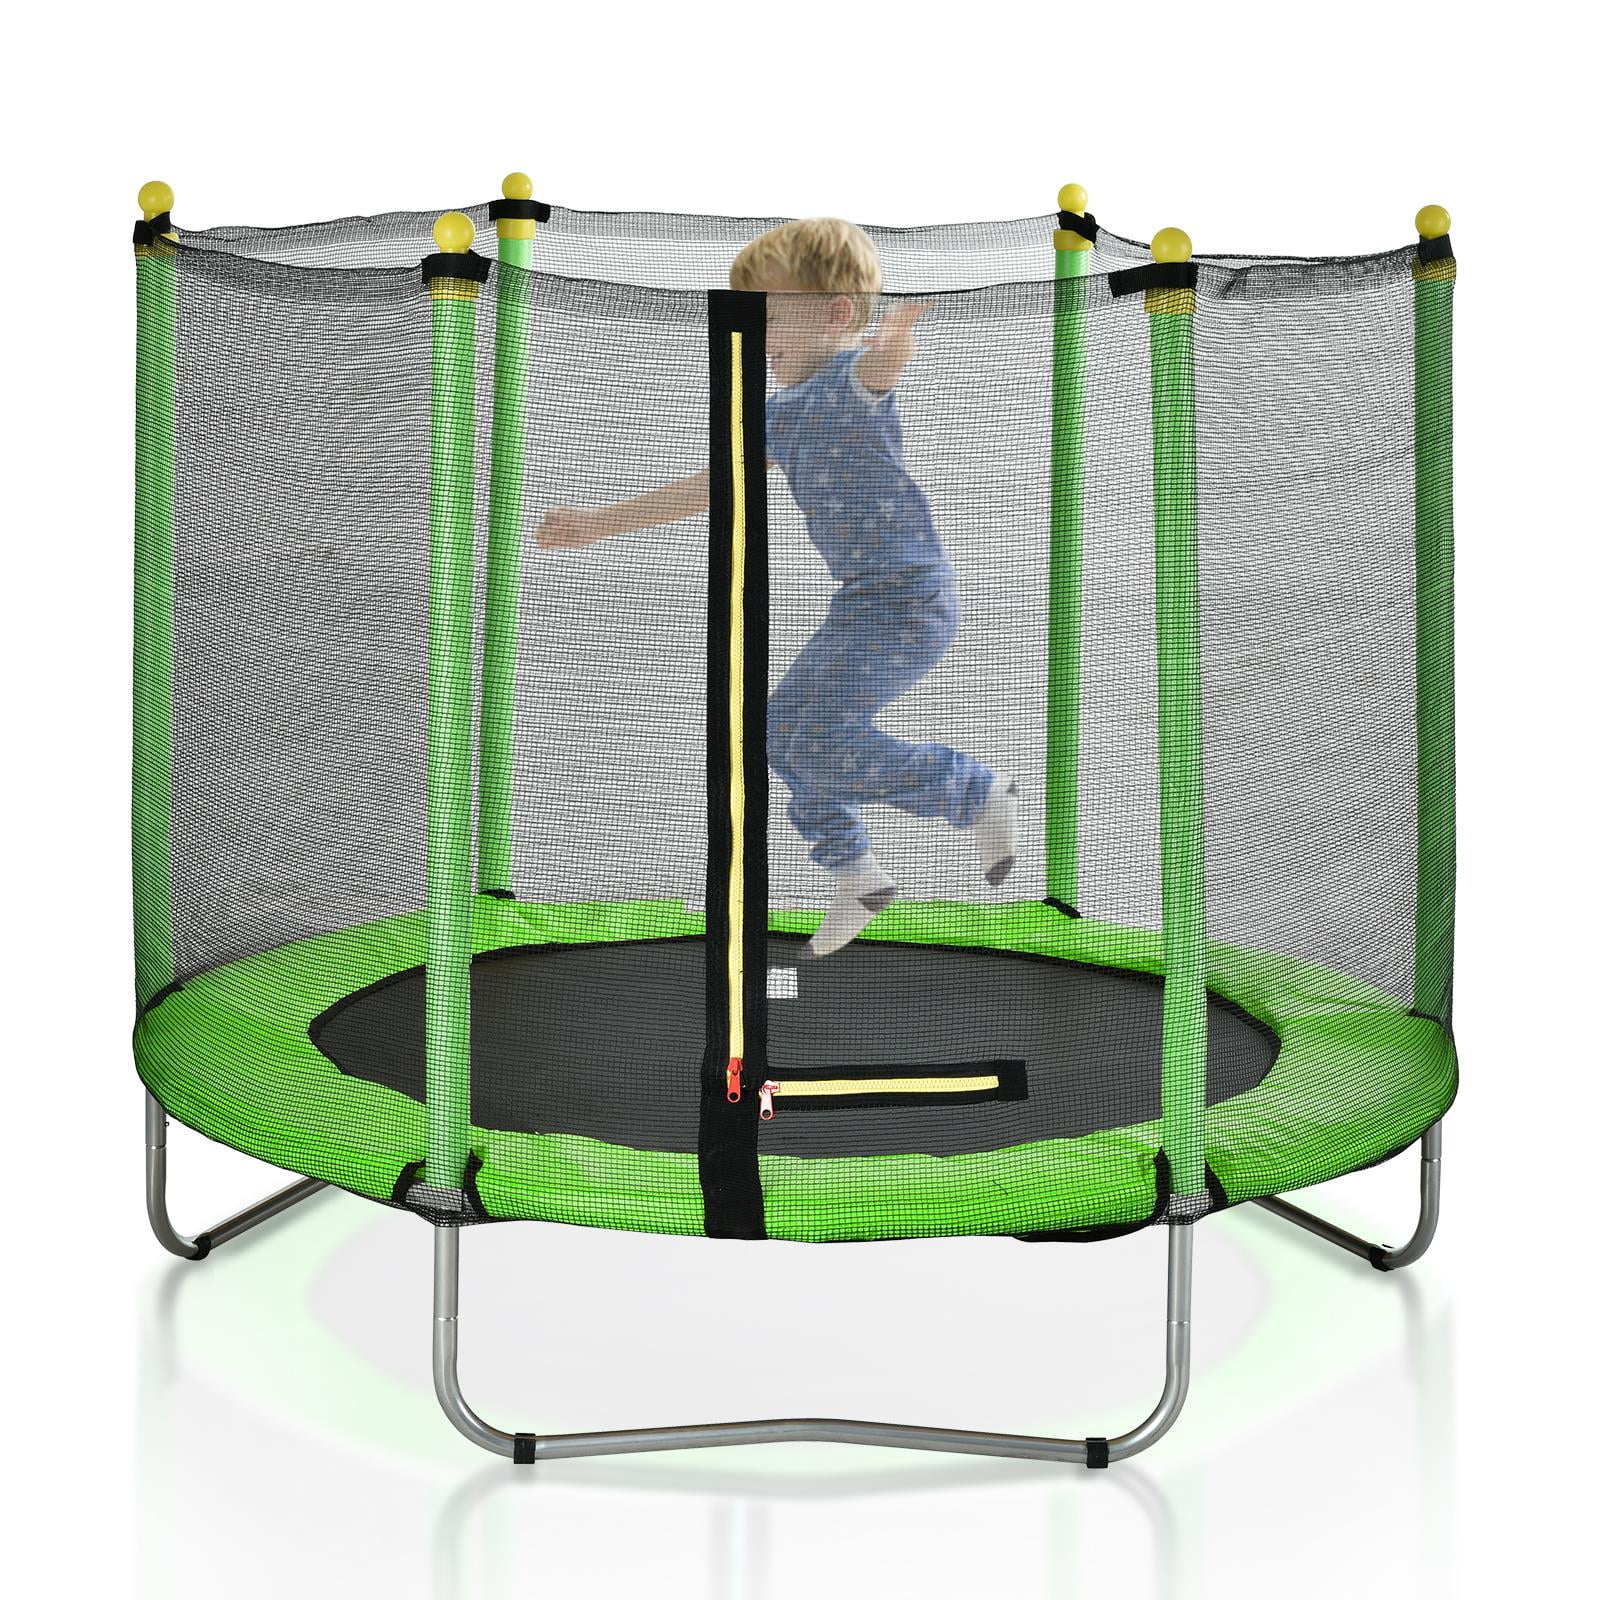 Zimtown My First Small 60 inches Kids Mini Round Trampoline Combo, with Surround Enclosure, Green